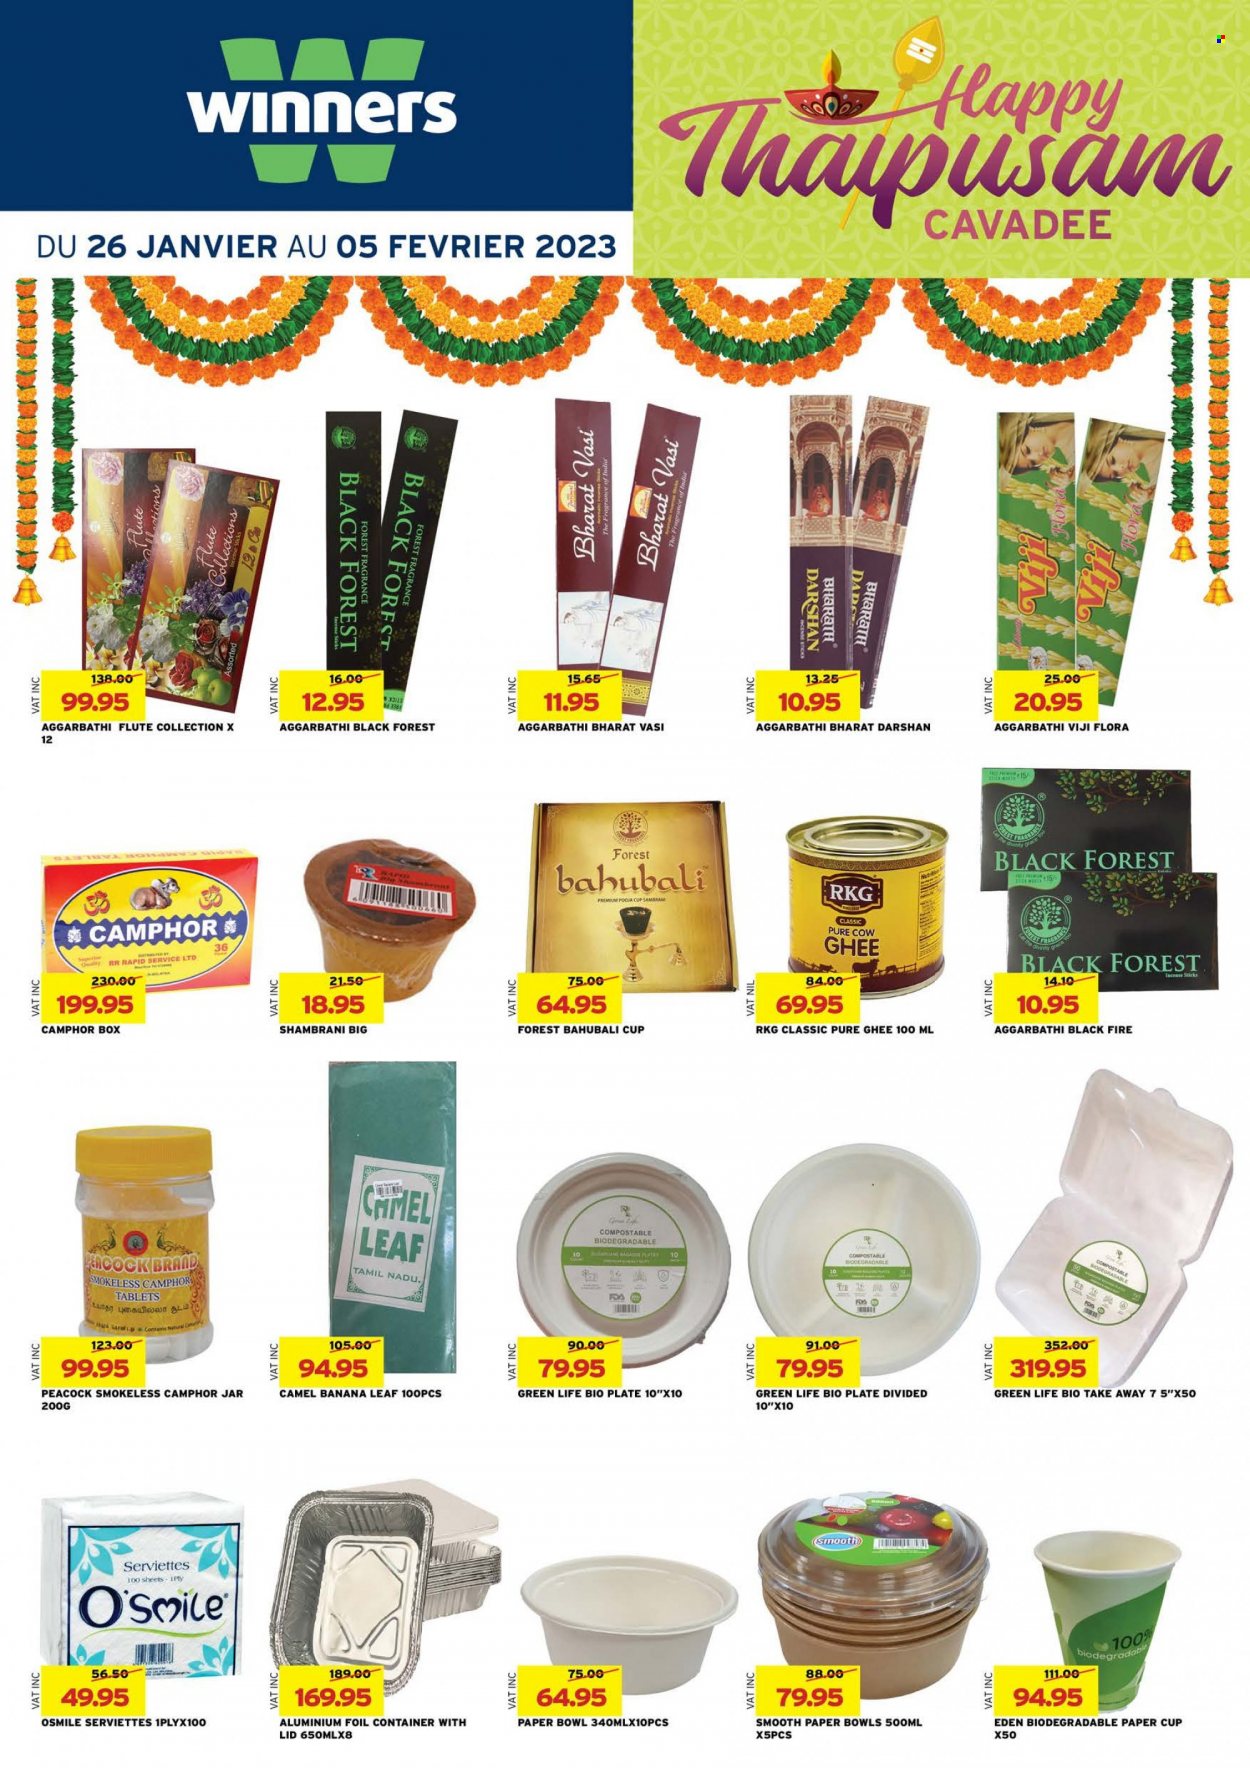 thumbnail - Winner's Catalogue - 26.01.2023 - 5.02.2023 - Sales products - ghee, Flora, Camel, fragrance, plate, cup, bowl, container, aluminium foil, jar, party cups, paper bowl. Page 28.